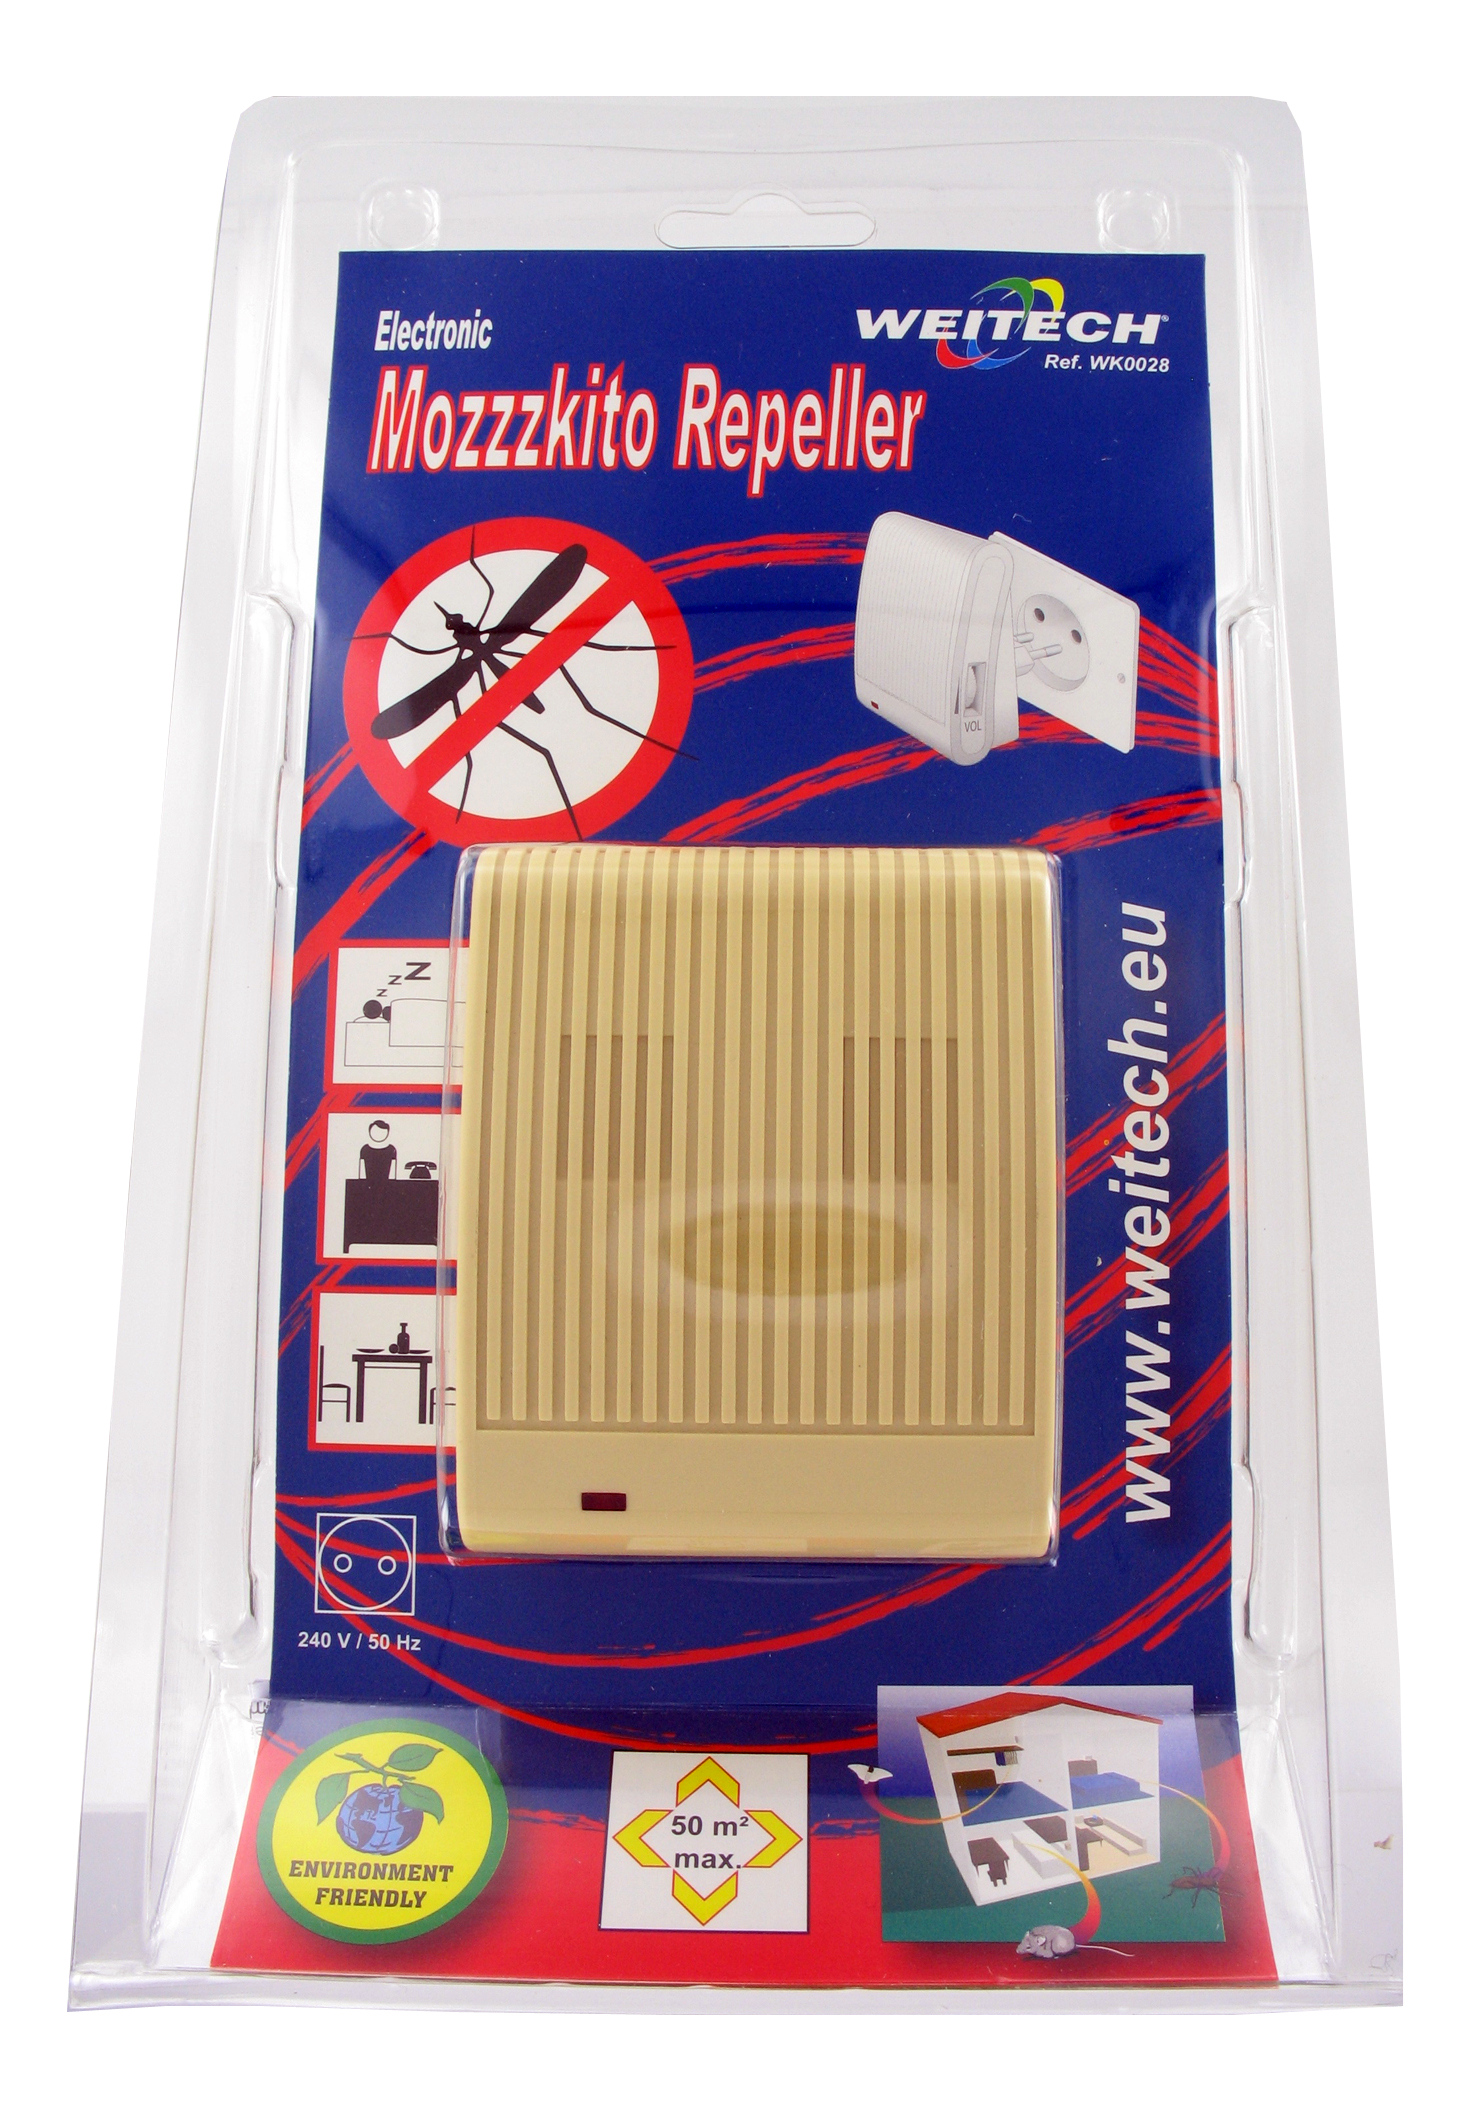 Ultrasonic mosquito repellent /Weitech works from the mains